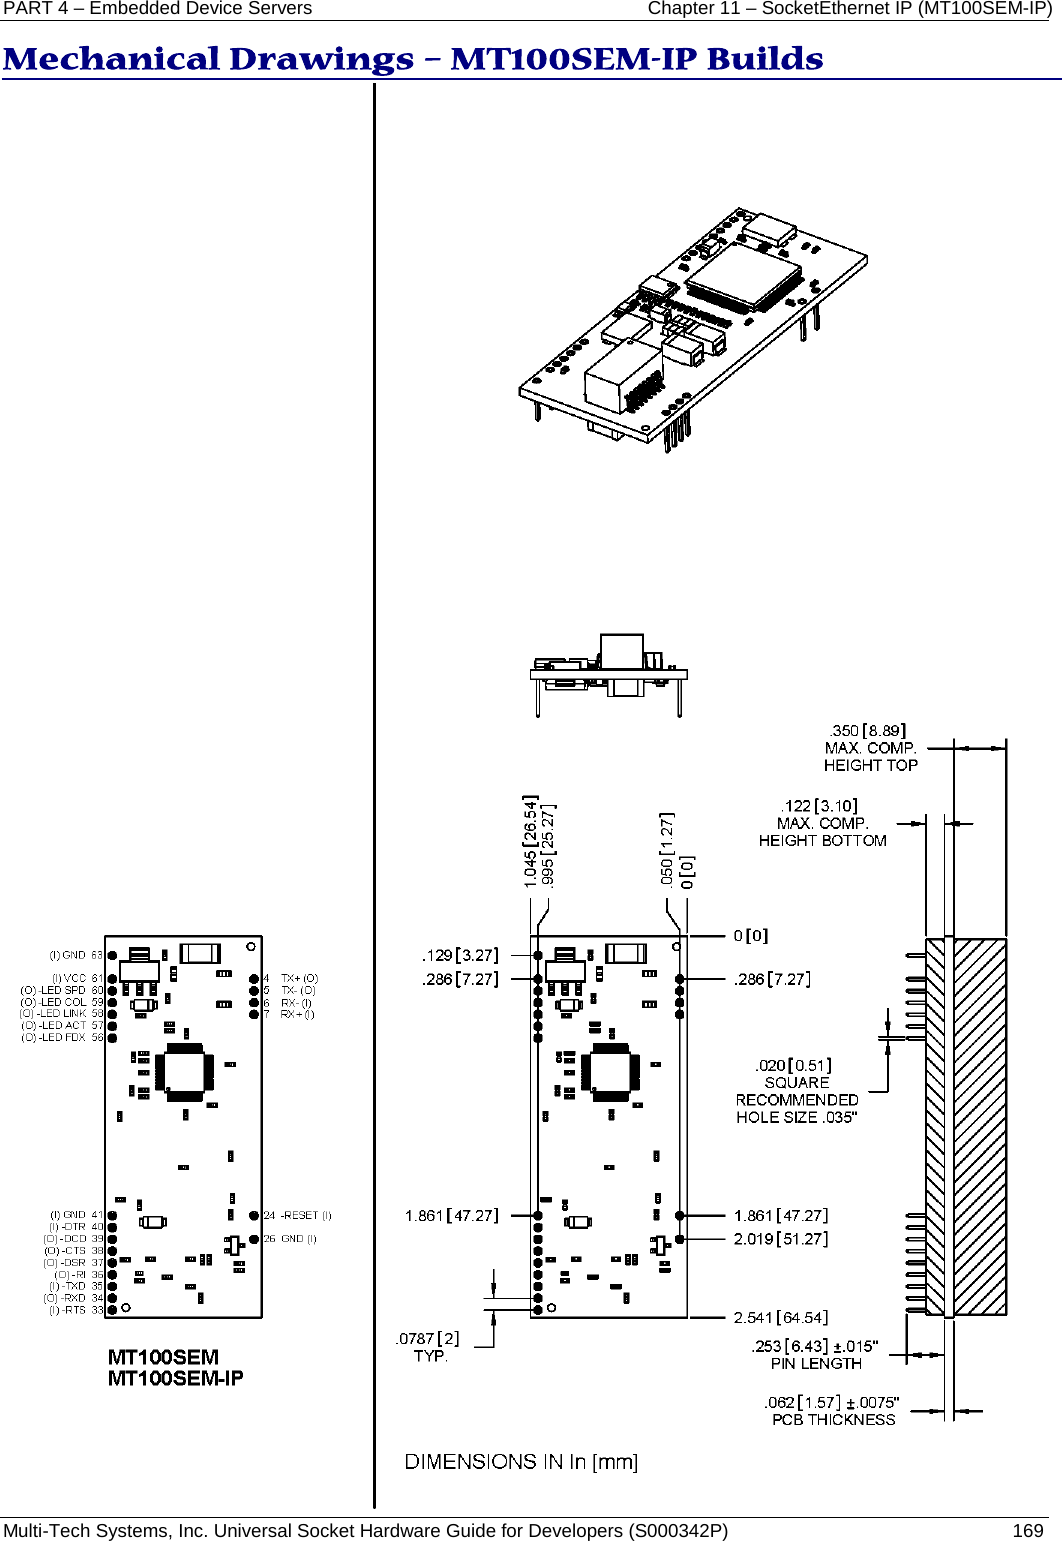 PART 4 – Embedded Device Servers Chapter 11 – SocketEthernet IP (MT100SEM-IP)  Multi-Tech Systems, Inc. Universal Socket Hardware Guide for Developers (S000342P)  169  Mechanical Drawings – MT100SEM-IP Builds  